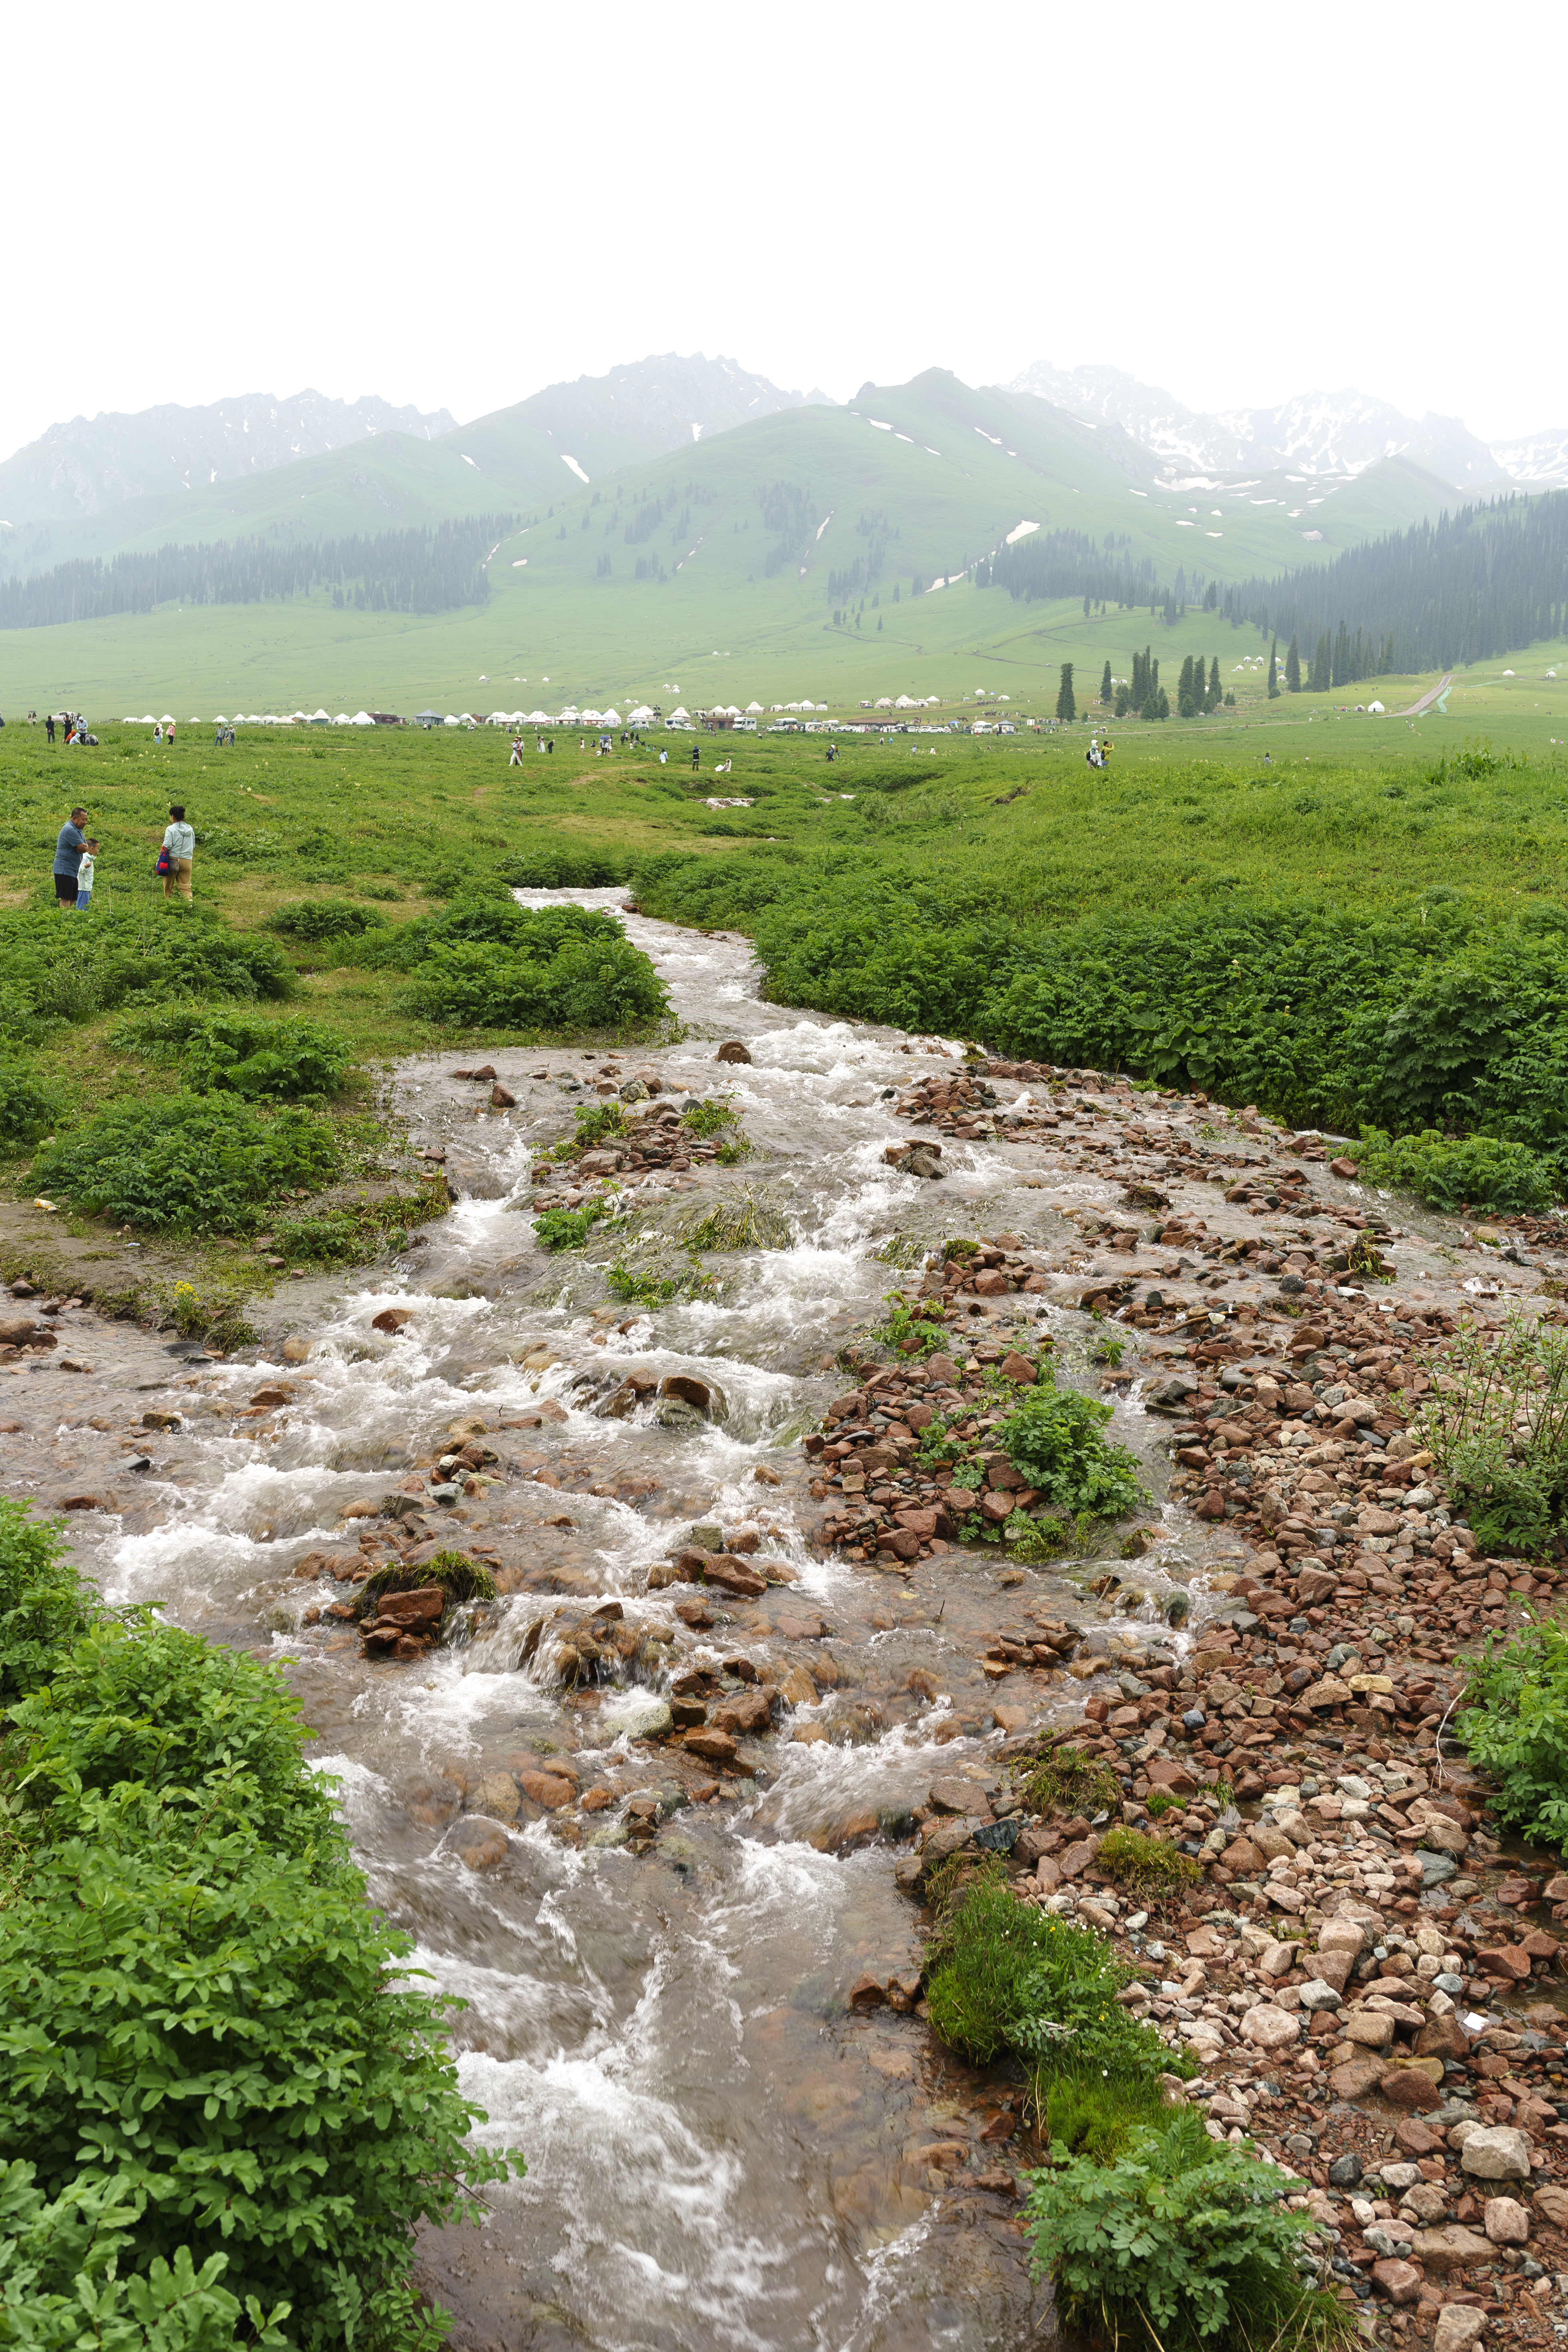 Landscape Creeks Grass China Xinjiang Mountains Portrait Display Water Nature Trees Snow Rocks 3921x5881